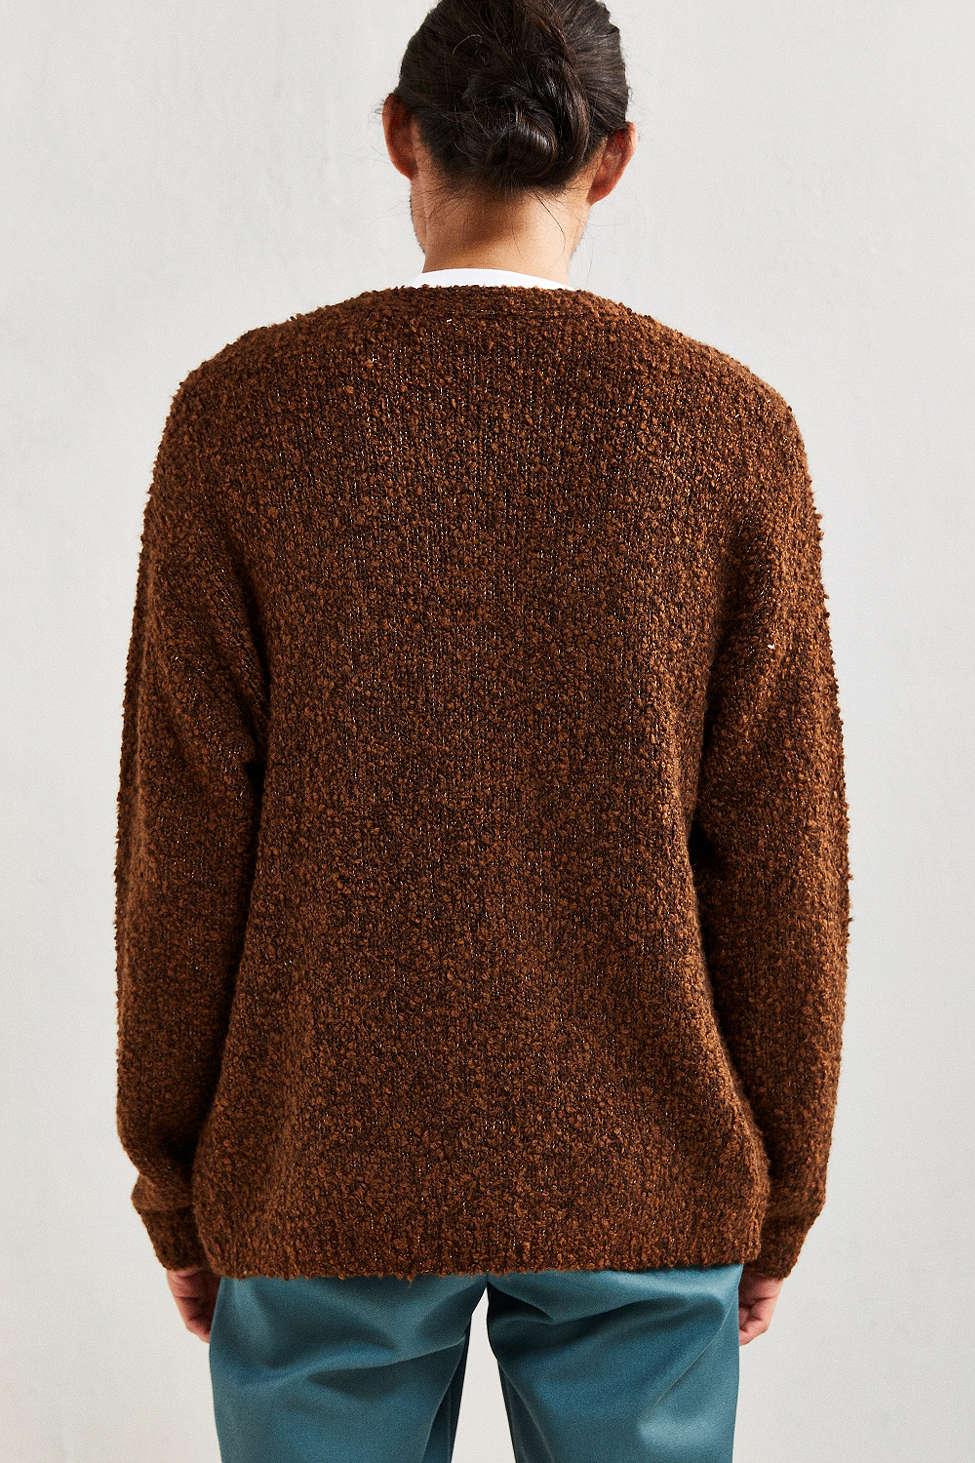 Urban Outfitters Cotton Uo Grandpa Boucle Cardigan in Brown for Men - Lyst